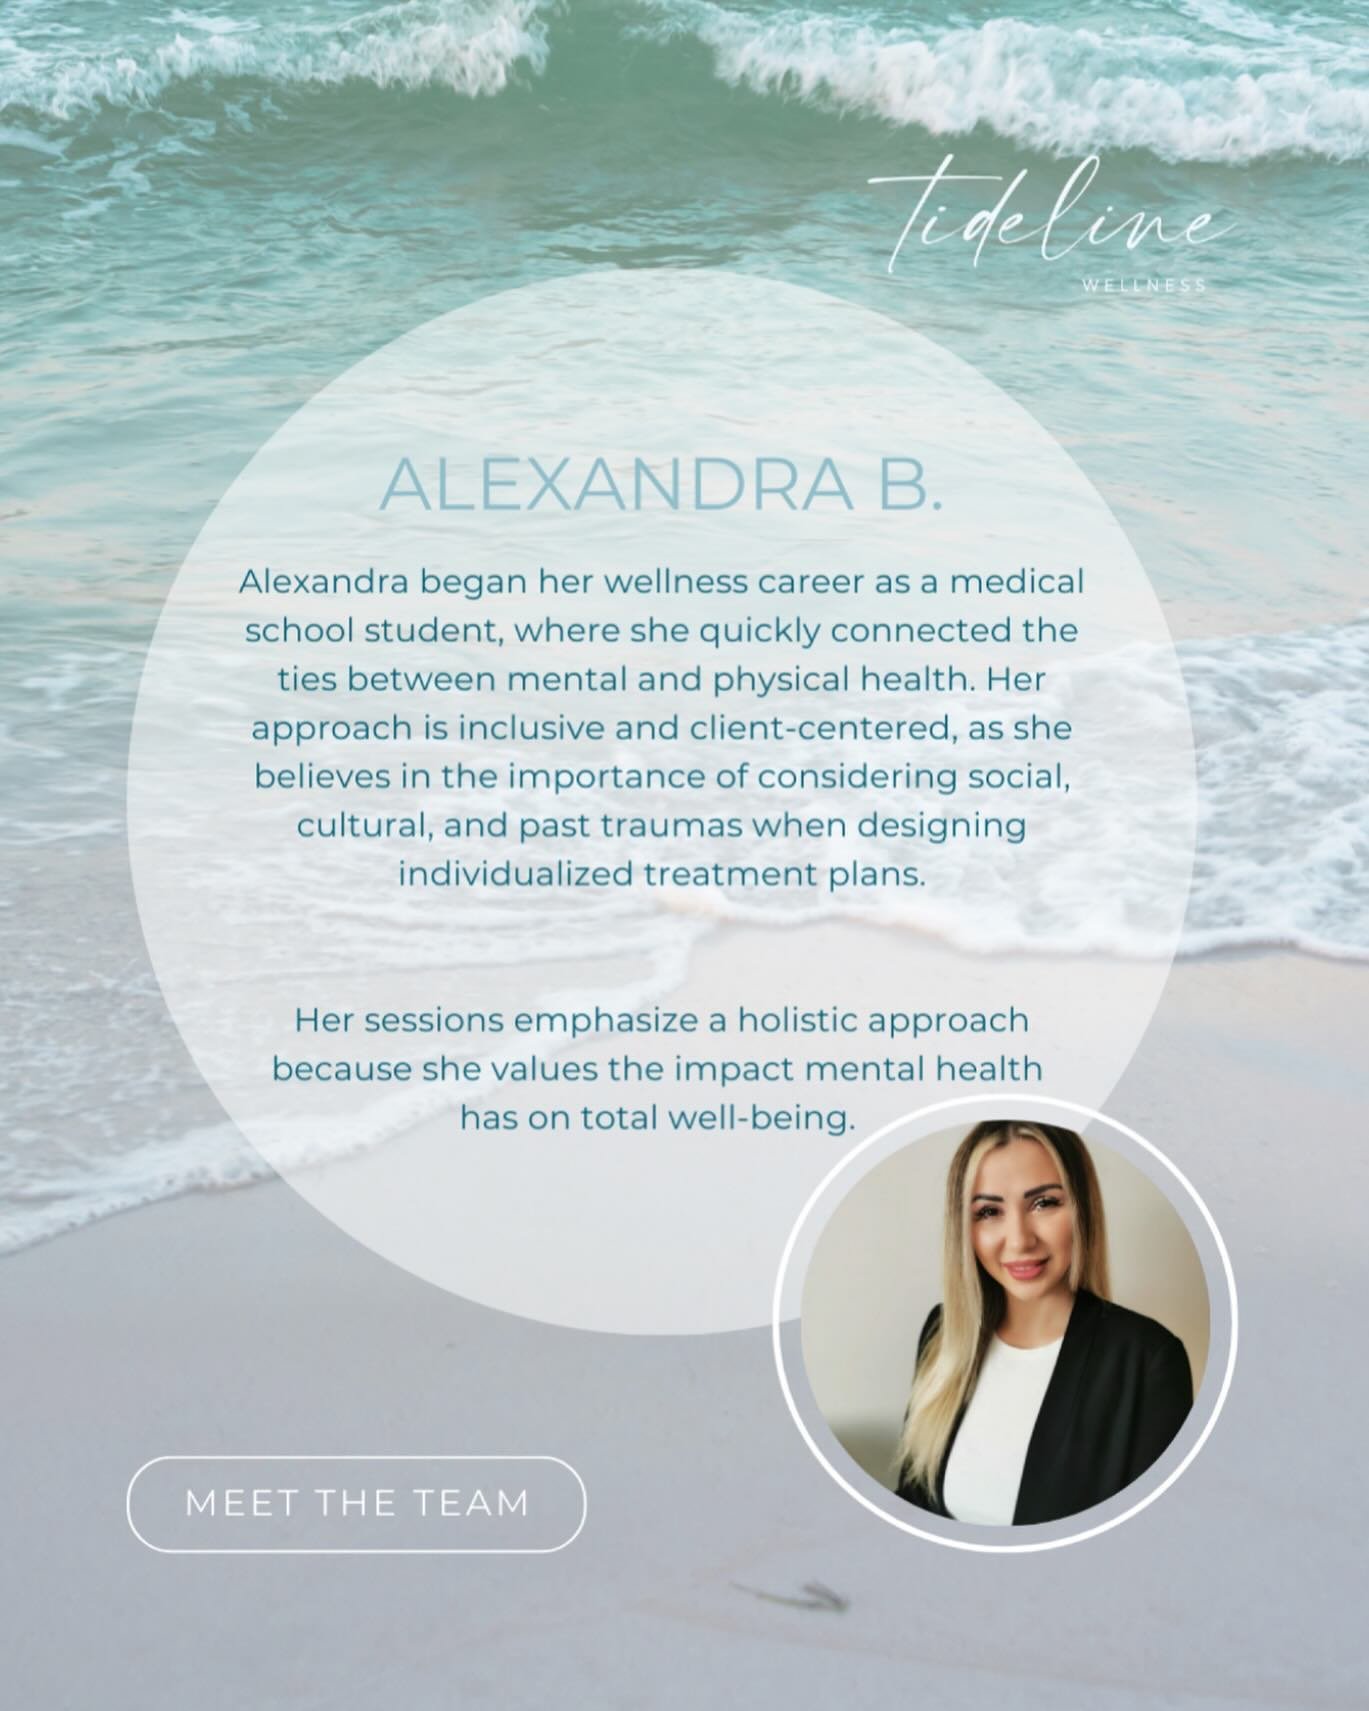 Introducing Alexandra 🎉

Alexandra Berca is a dedicated and compassionate counsellor who empowers her clients to dive into their inner light as they navigate their path to growth. Her approach is inclusive and client-centered, as she believes in the